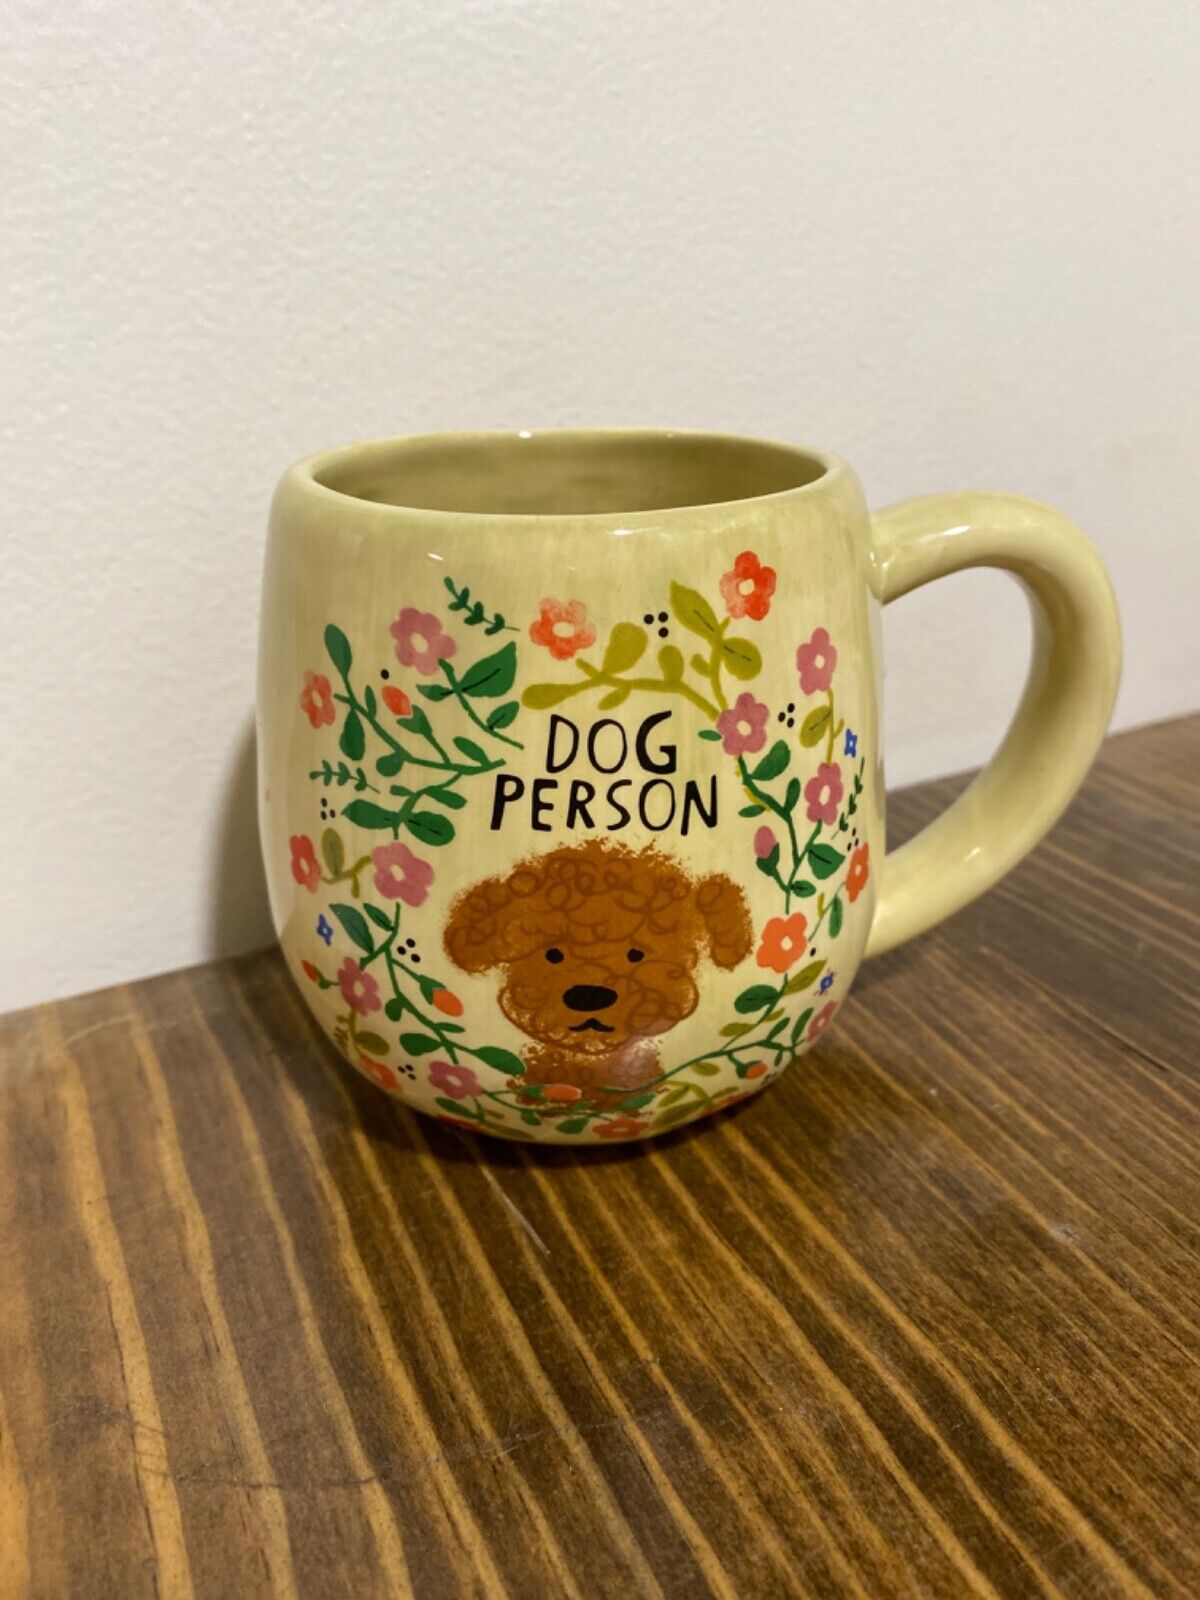 Dog Person yellow ceramic  cup, natural life brand, floral decorative pattern